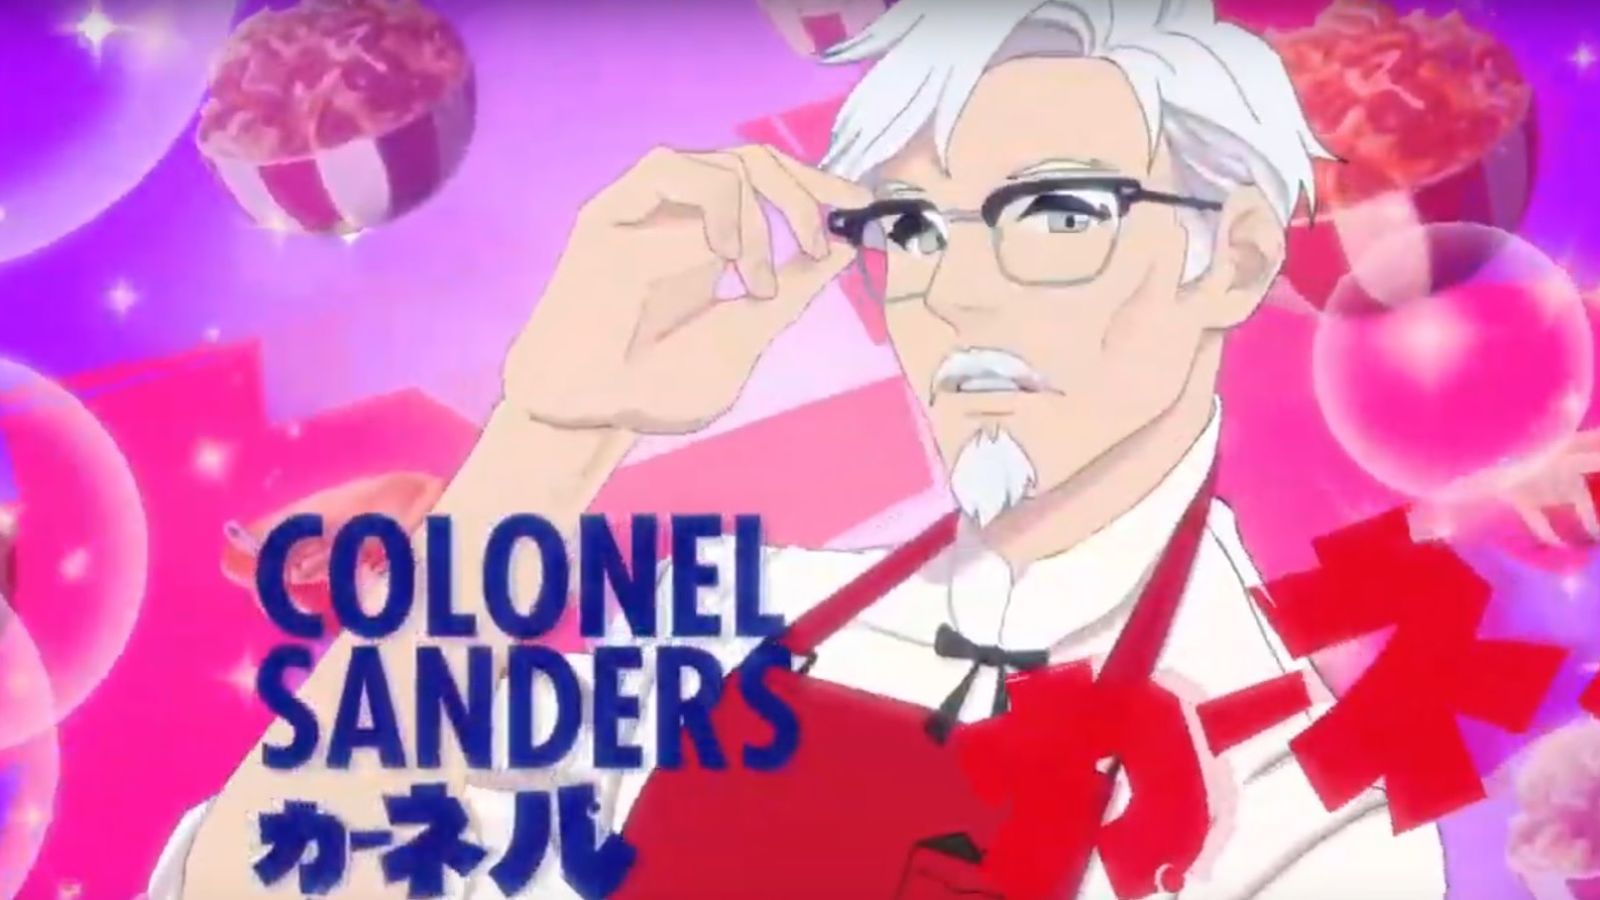 KFC is Releasing a Dating Simulator Game Ft. a Young Colonel Sanders